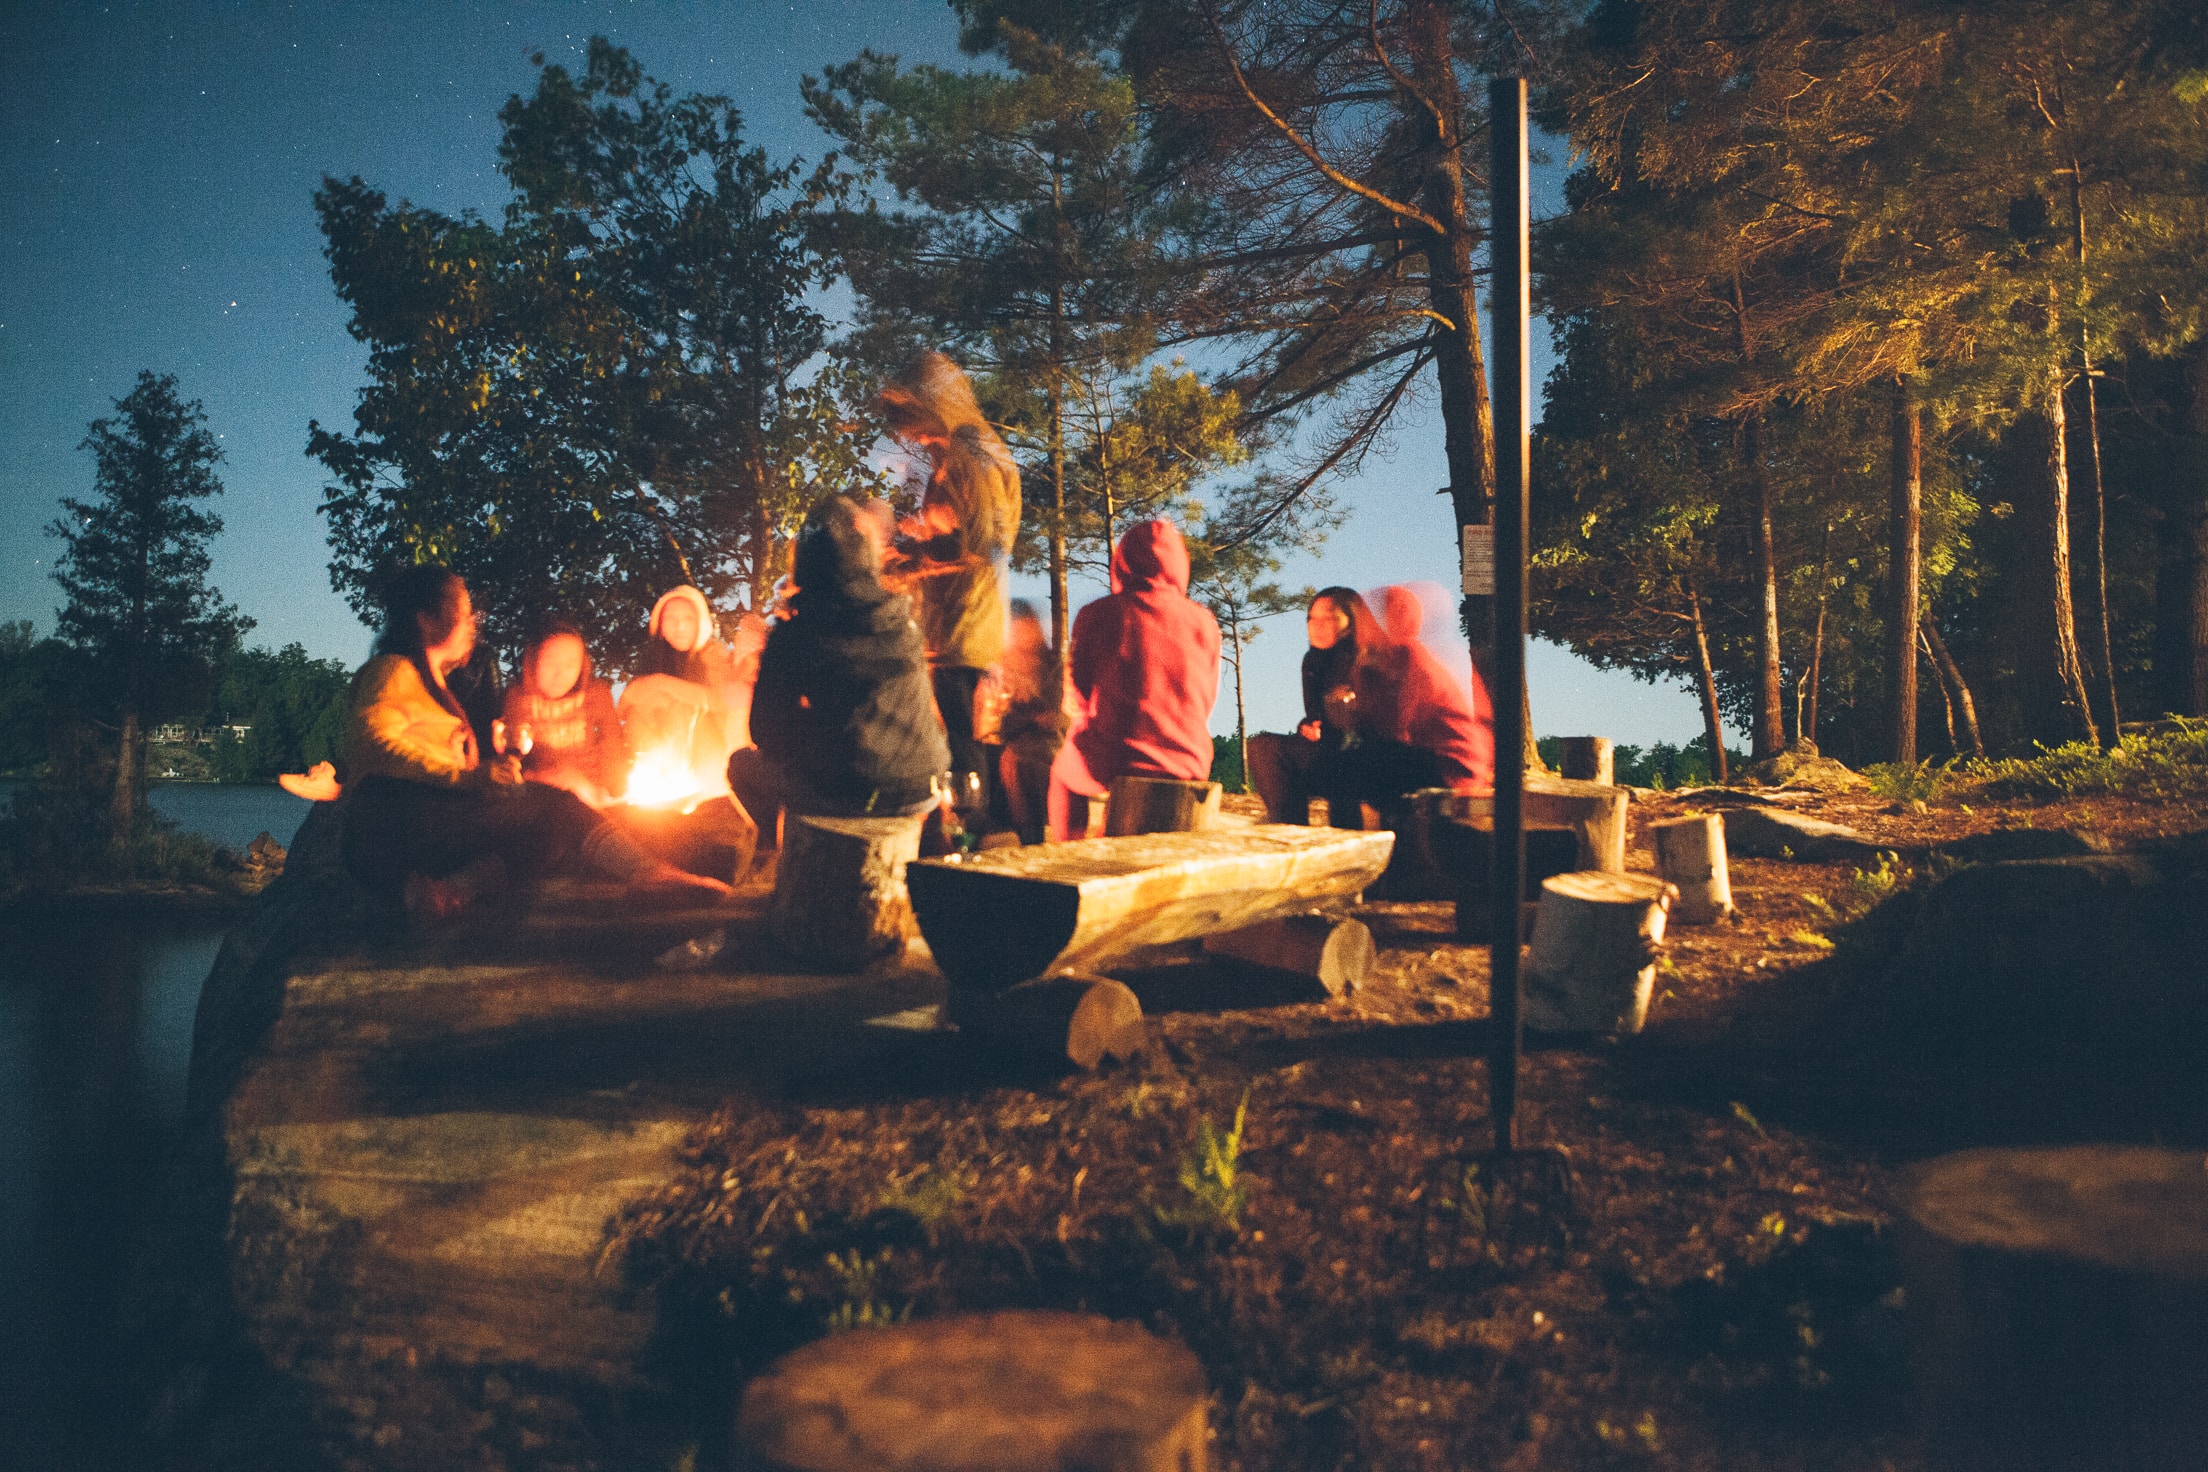 8 people wearing sweaters are getting cozy around a campfire at dusk